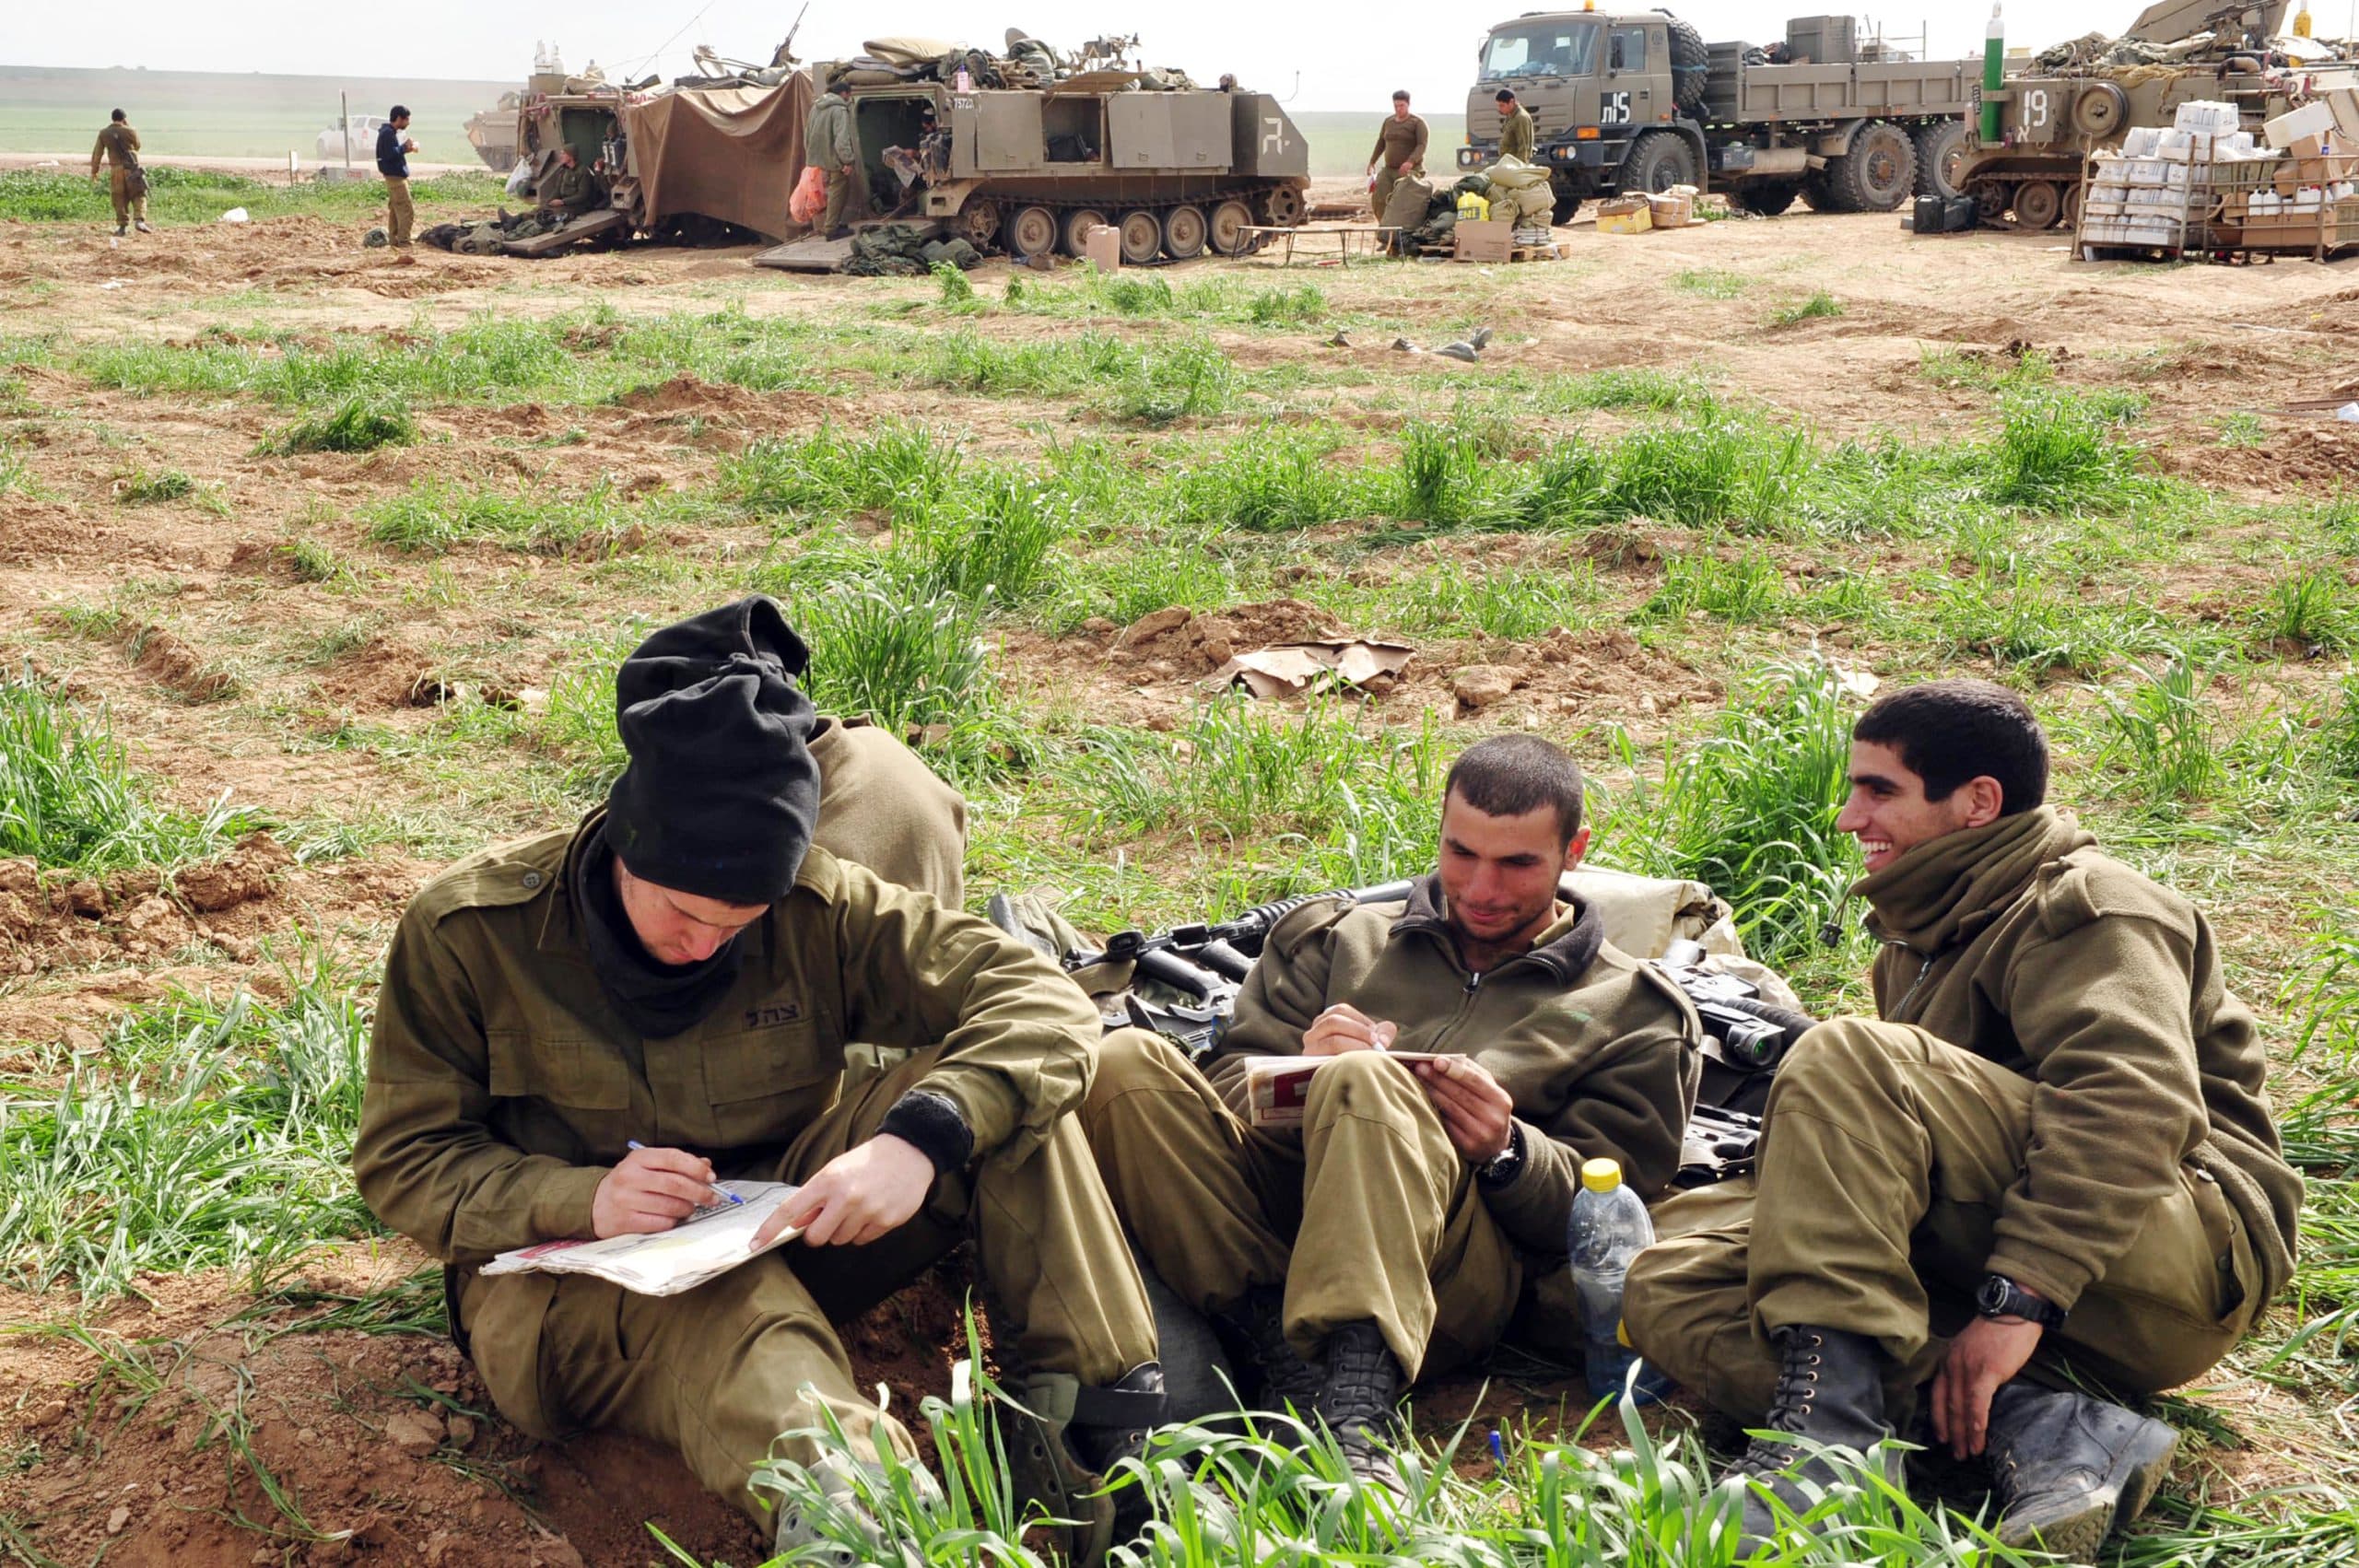 Soldiers resting and writing in the field against the background of deployed military equipment